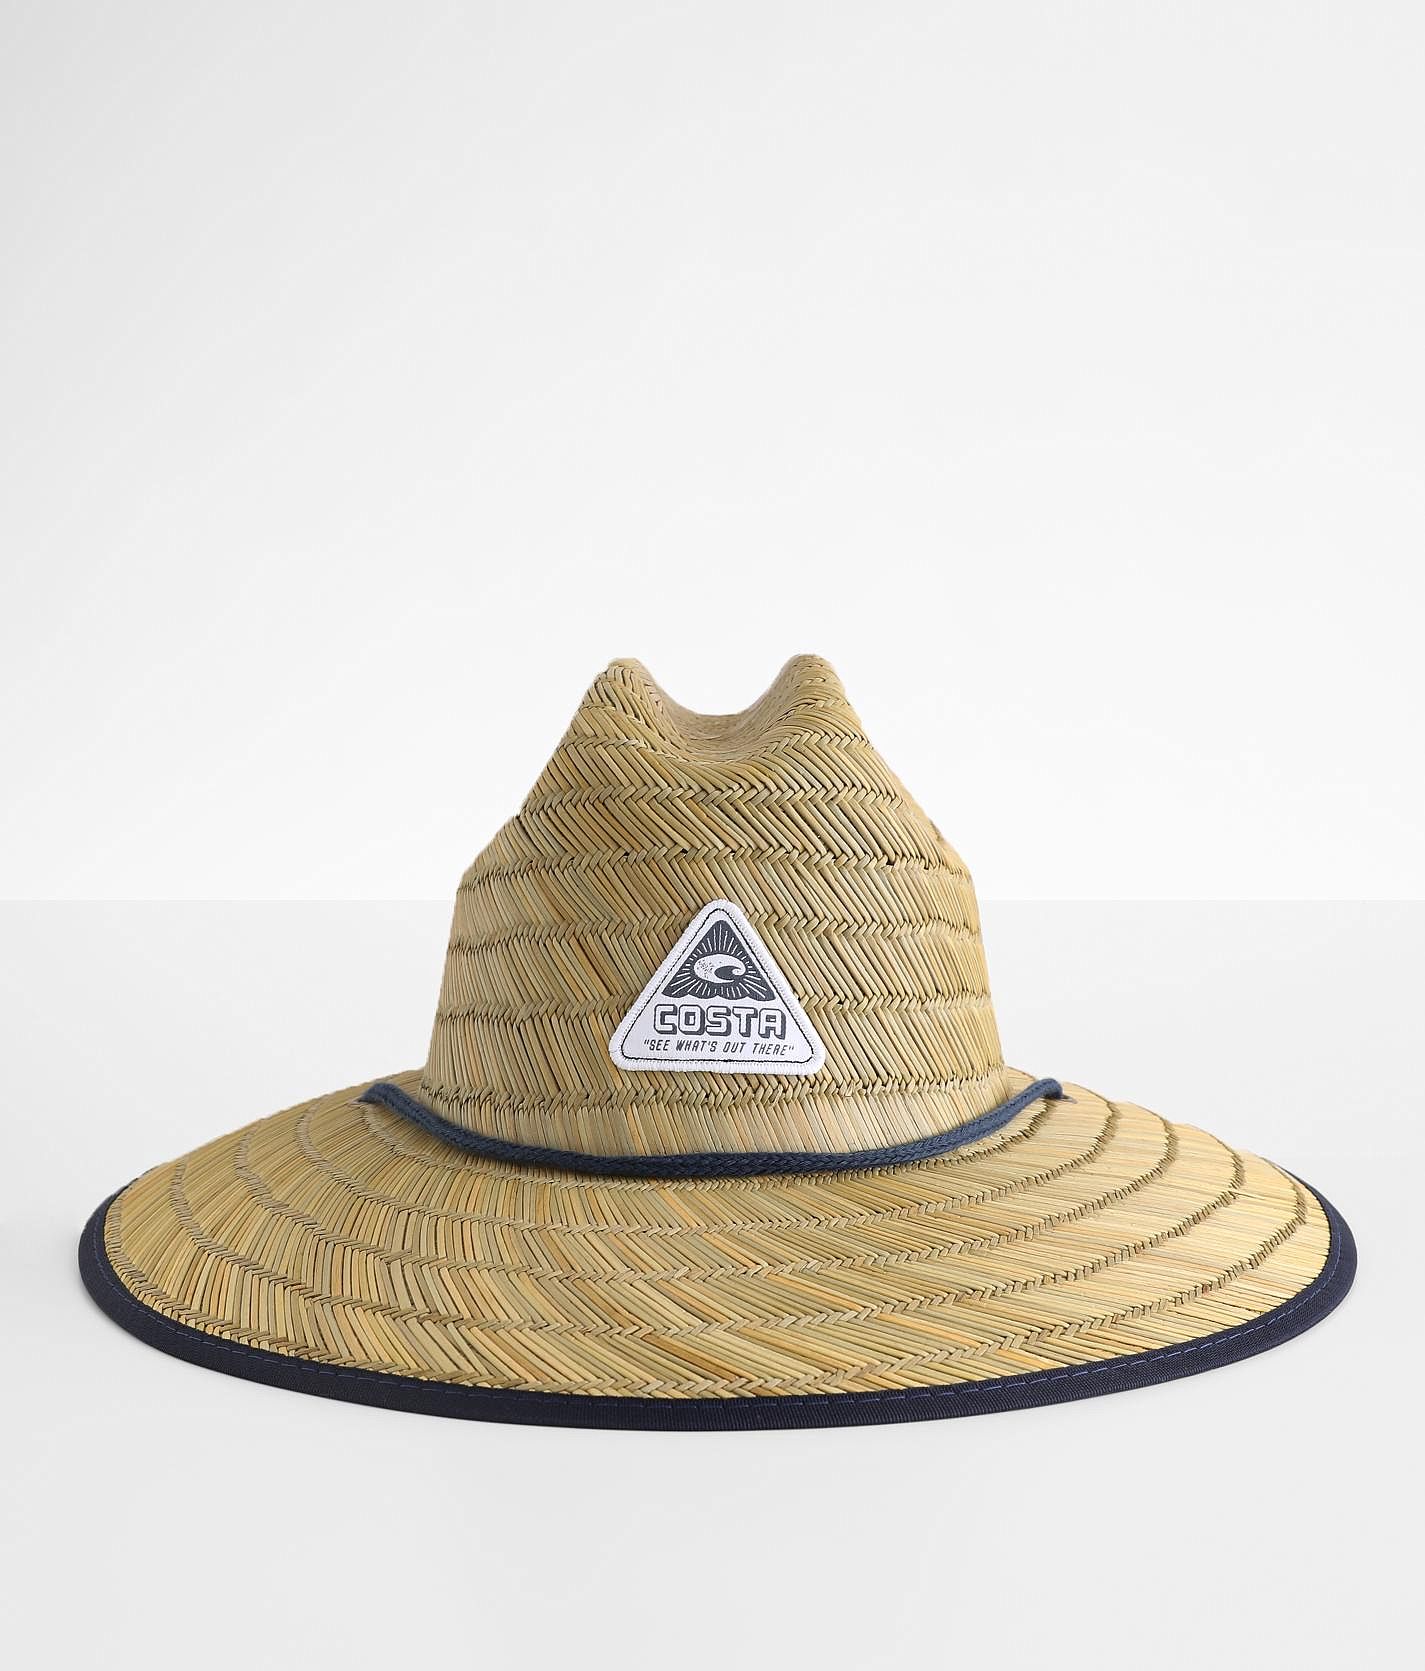 Costa® Swells Straw Hat - Men's Hats in Natural